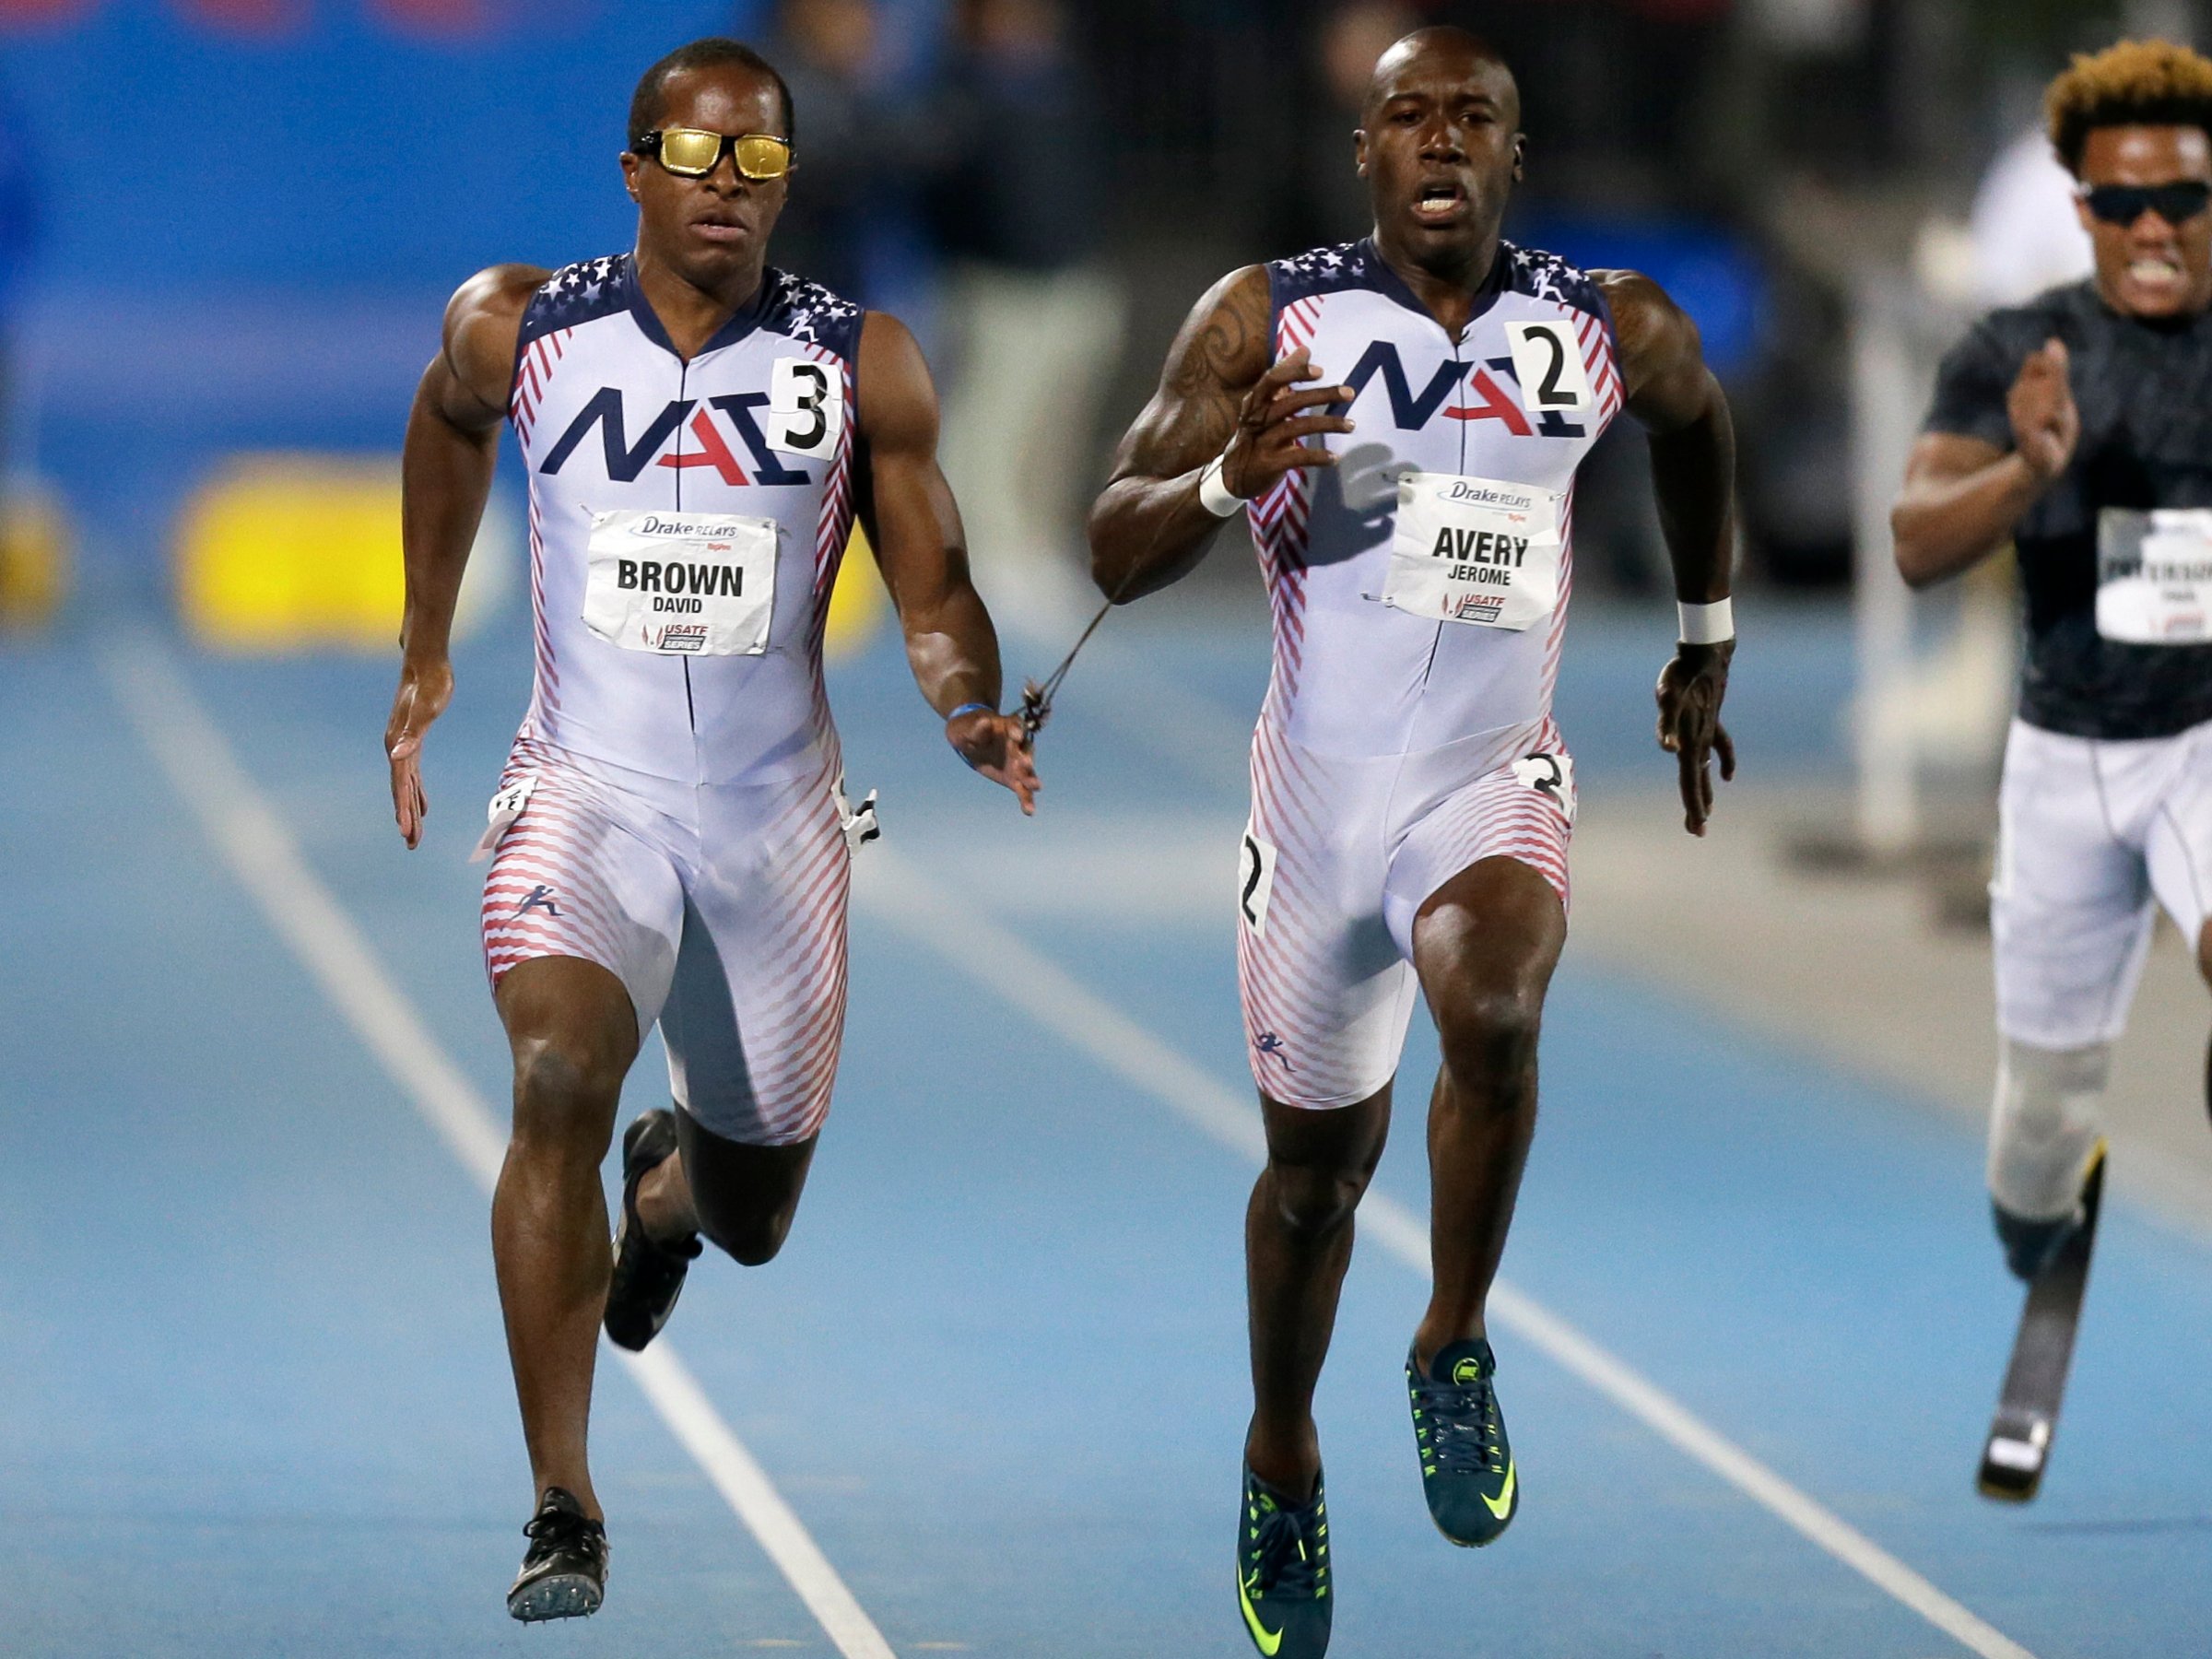 David Brown, left, and guide Jerome Avery compete in 2015. AP/Charlie ...